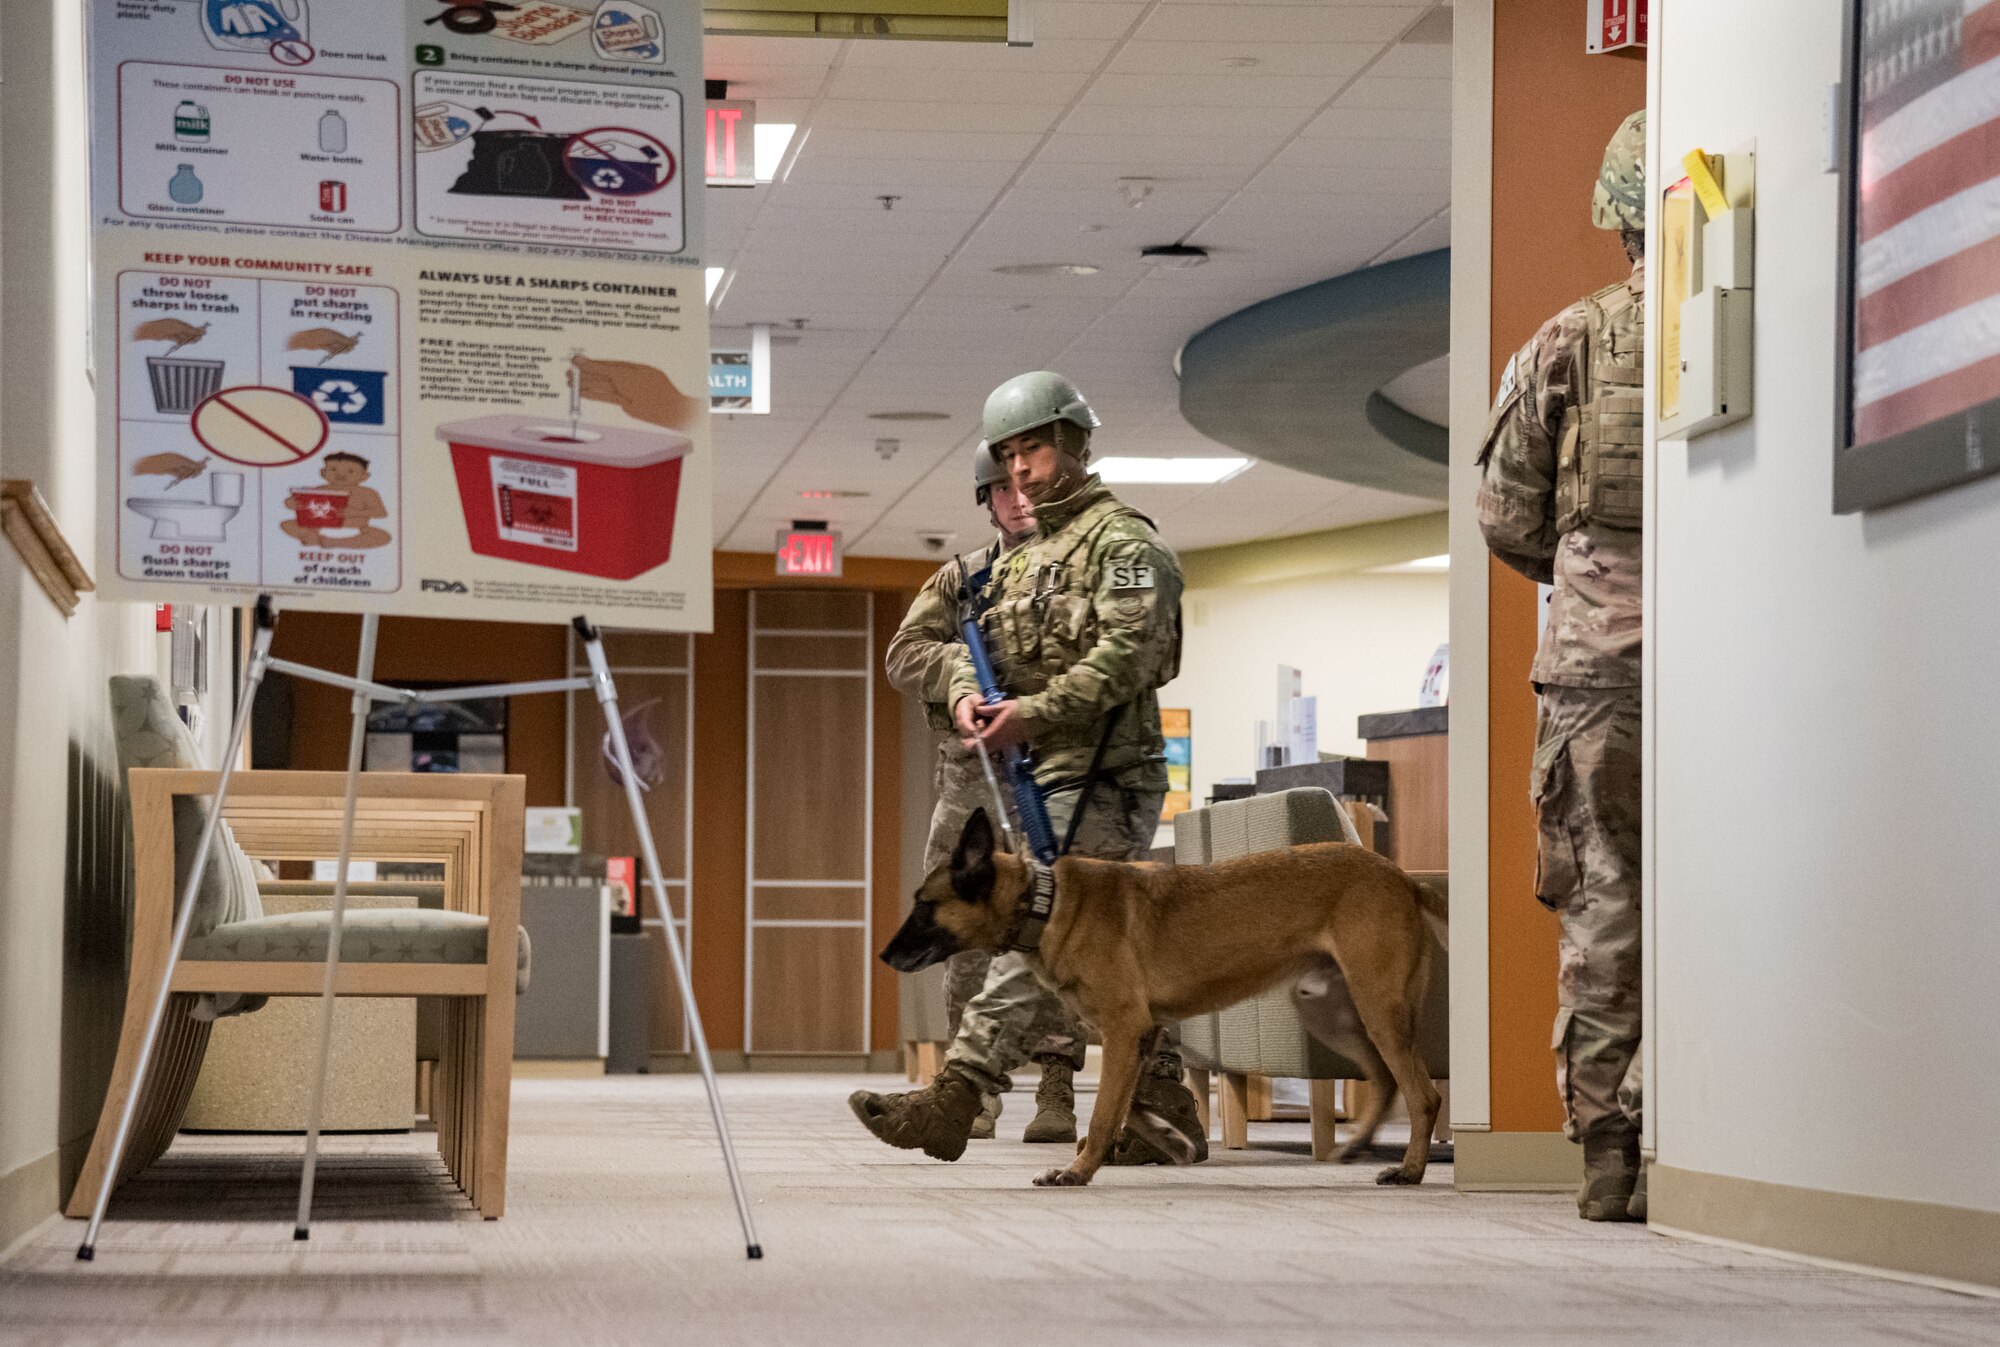 Staff Sgt. Edwin Arguetahernandez, 436th Security Forces Squadron military working dog handler, and MWD Johny, search the 436th Medical Group clinic for simulated victims during a simulated active shooter scene as part of Exercise DORMAR Nov. 12, 2019, at Dover Air Force Base, Del. Two 436th SFS response force members portrayed active shooters who mortally wounded clinic personnel. (U.S. Air Force photo by Roland Balik)